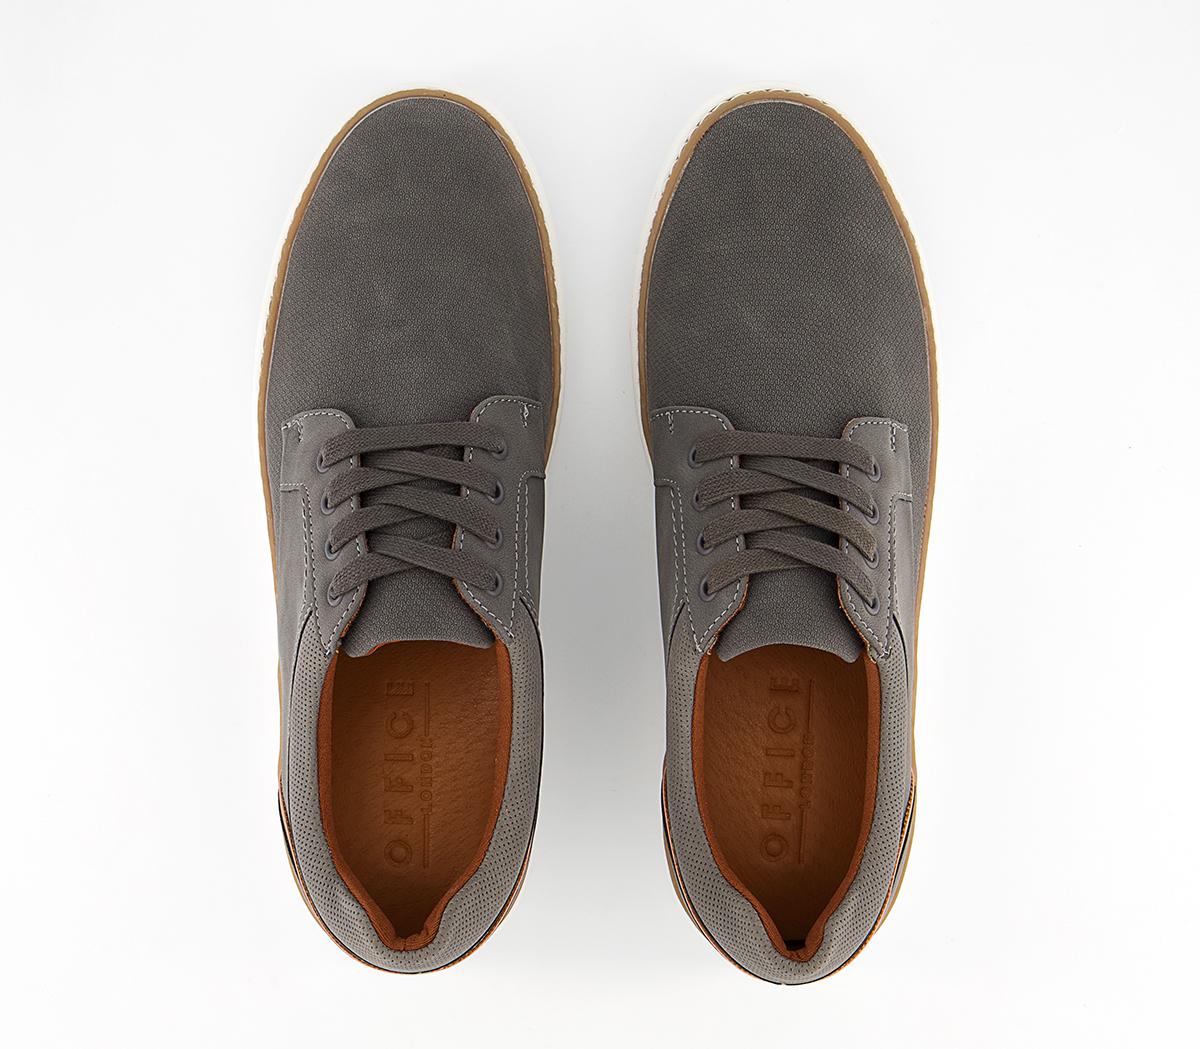 OFFICE Campbell Rand Sneakers Grey - Men's Casual Shoes